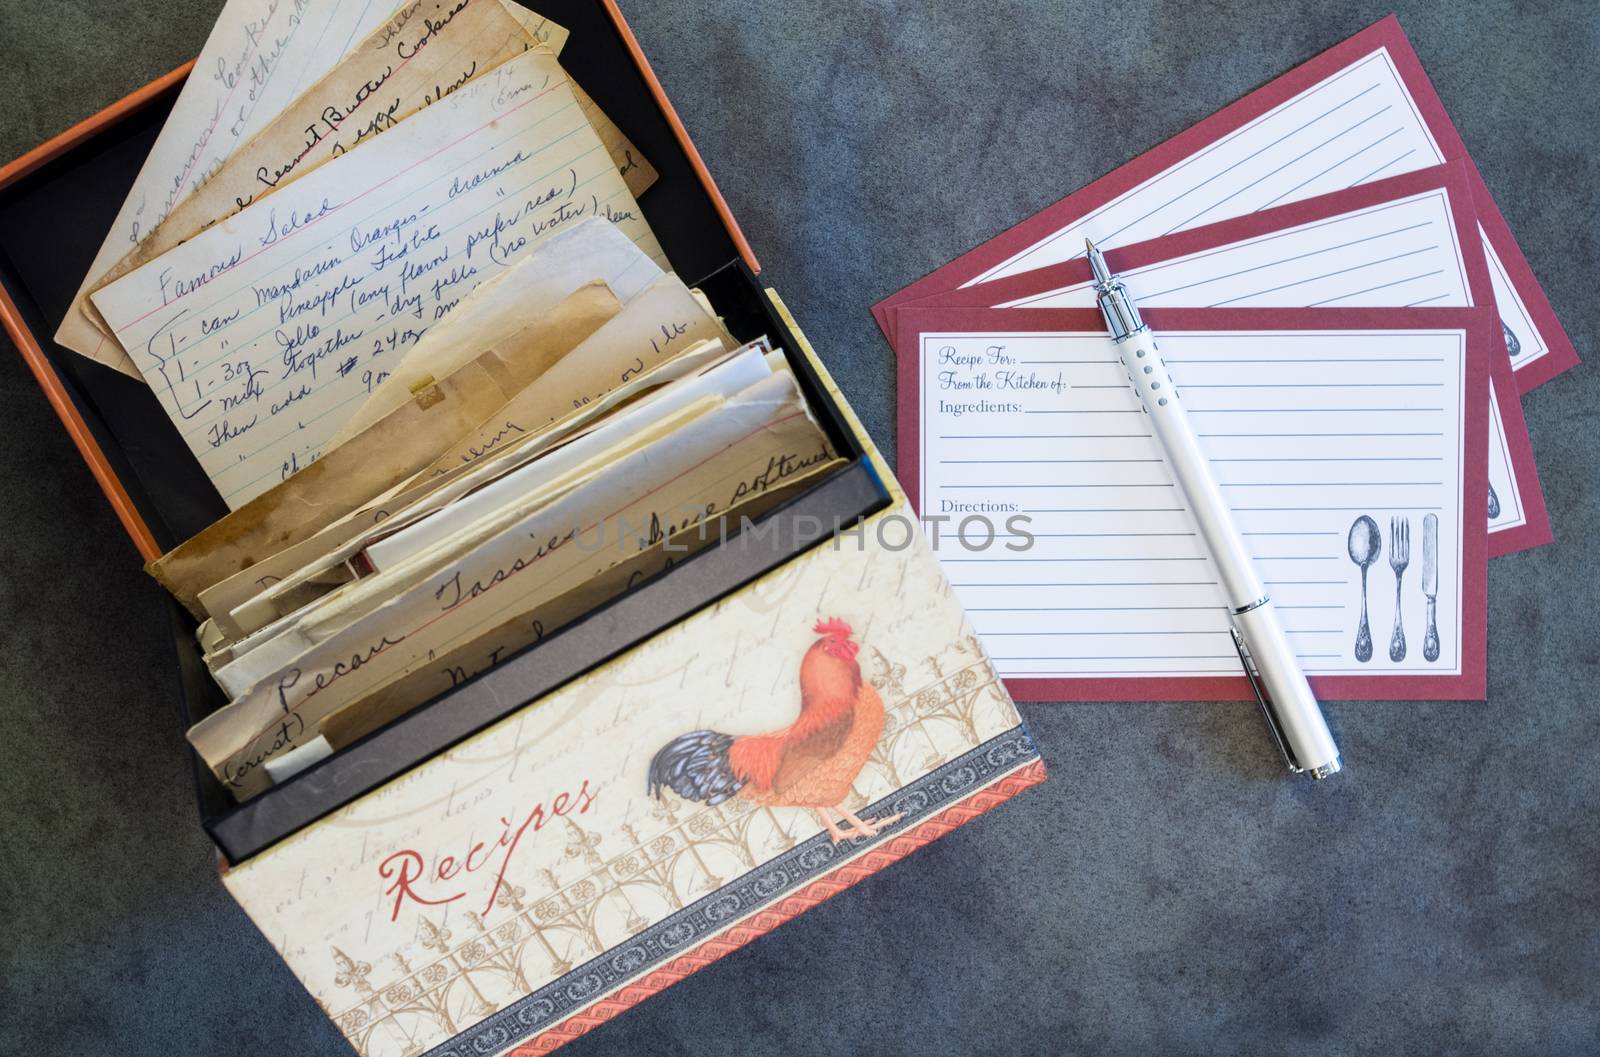 Recipe Box, Recipe Cards, Vintage Recipes by krisblackphotography